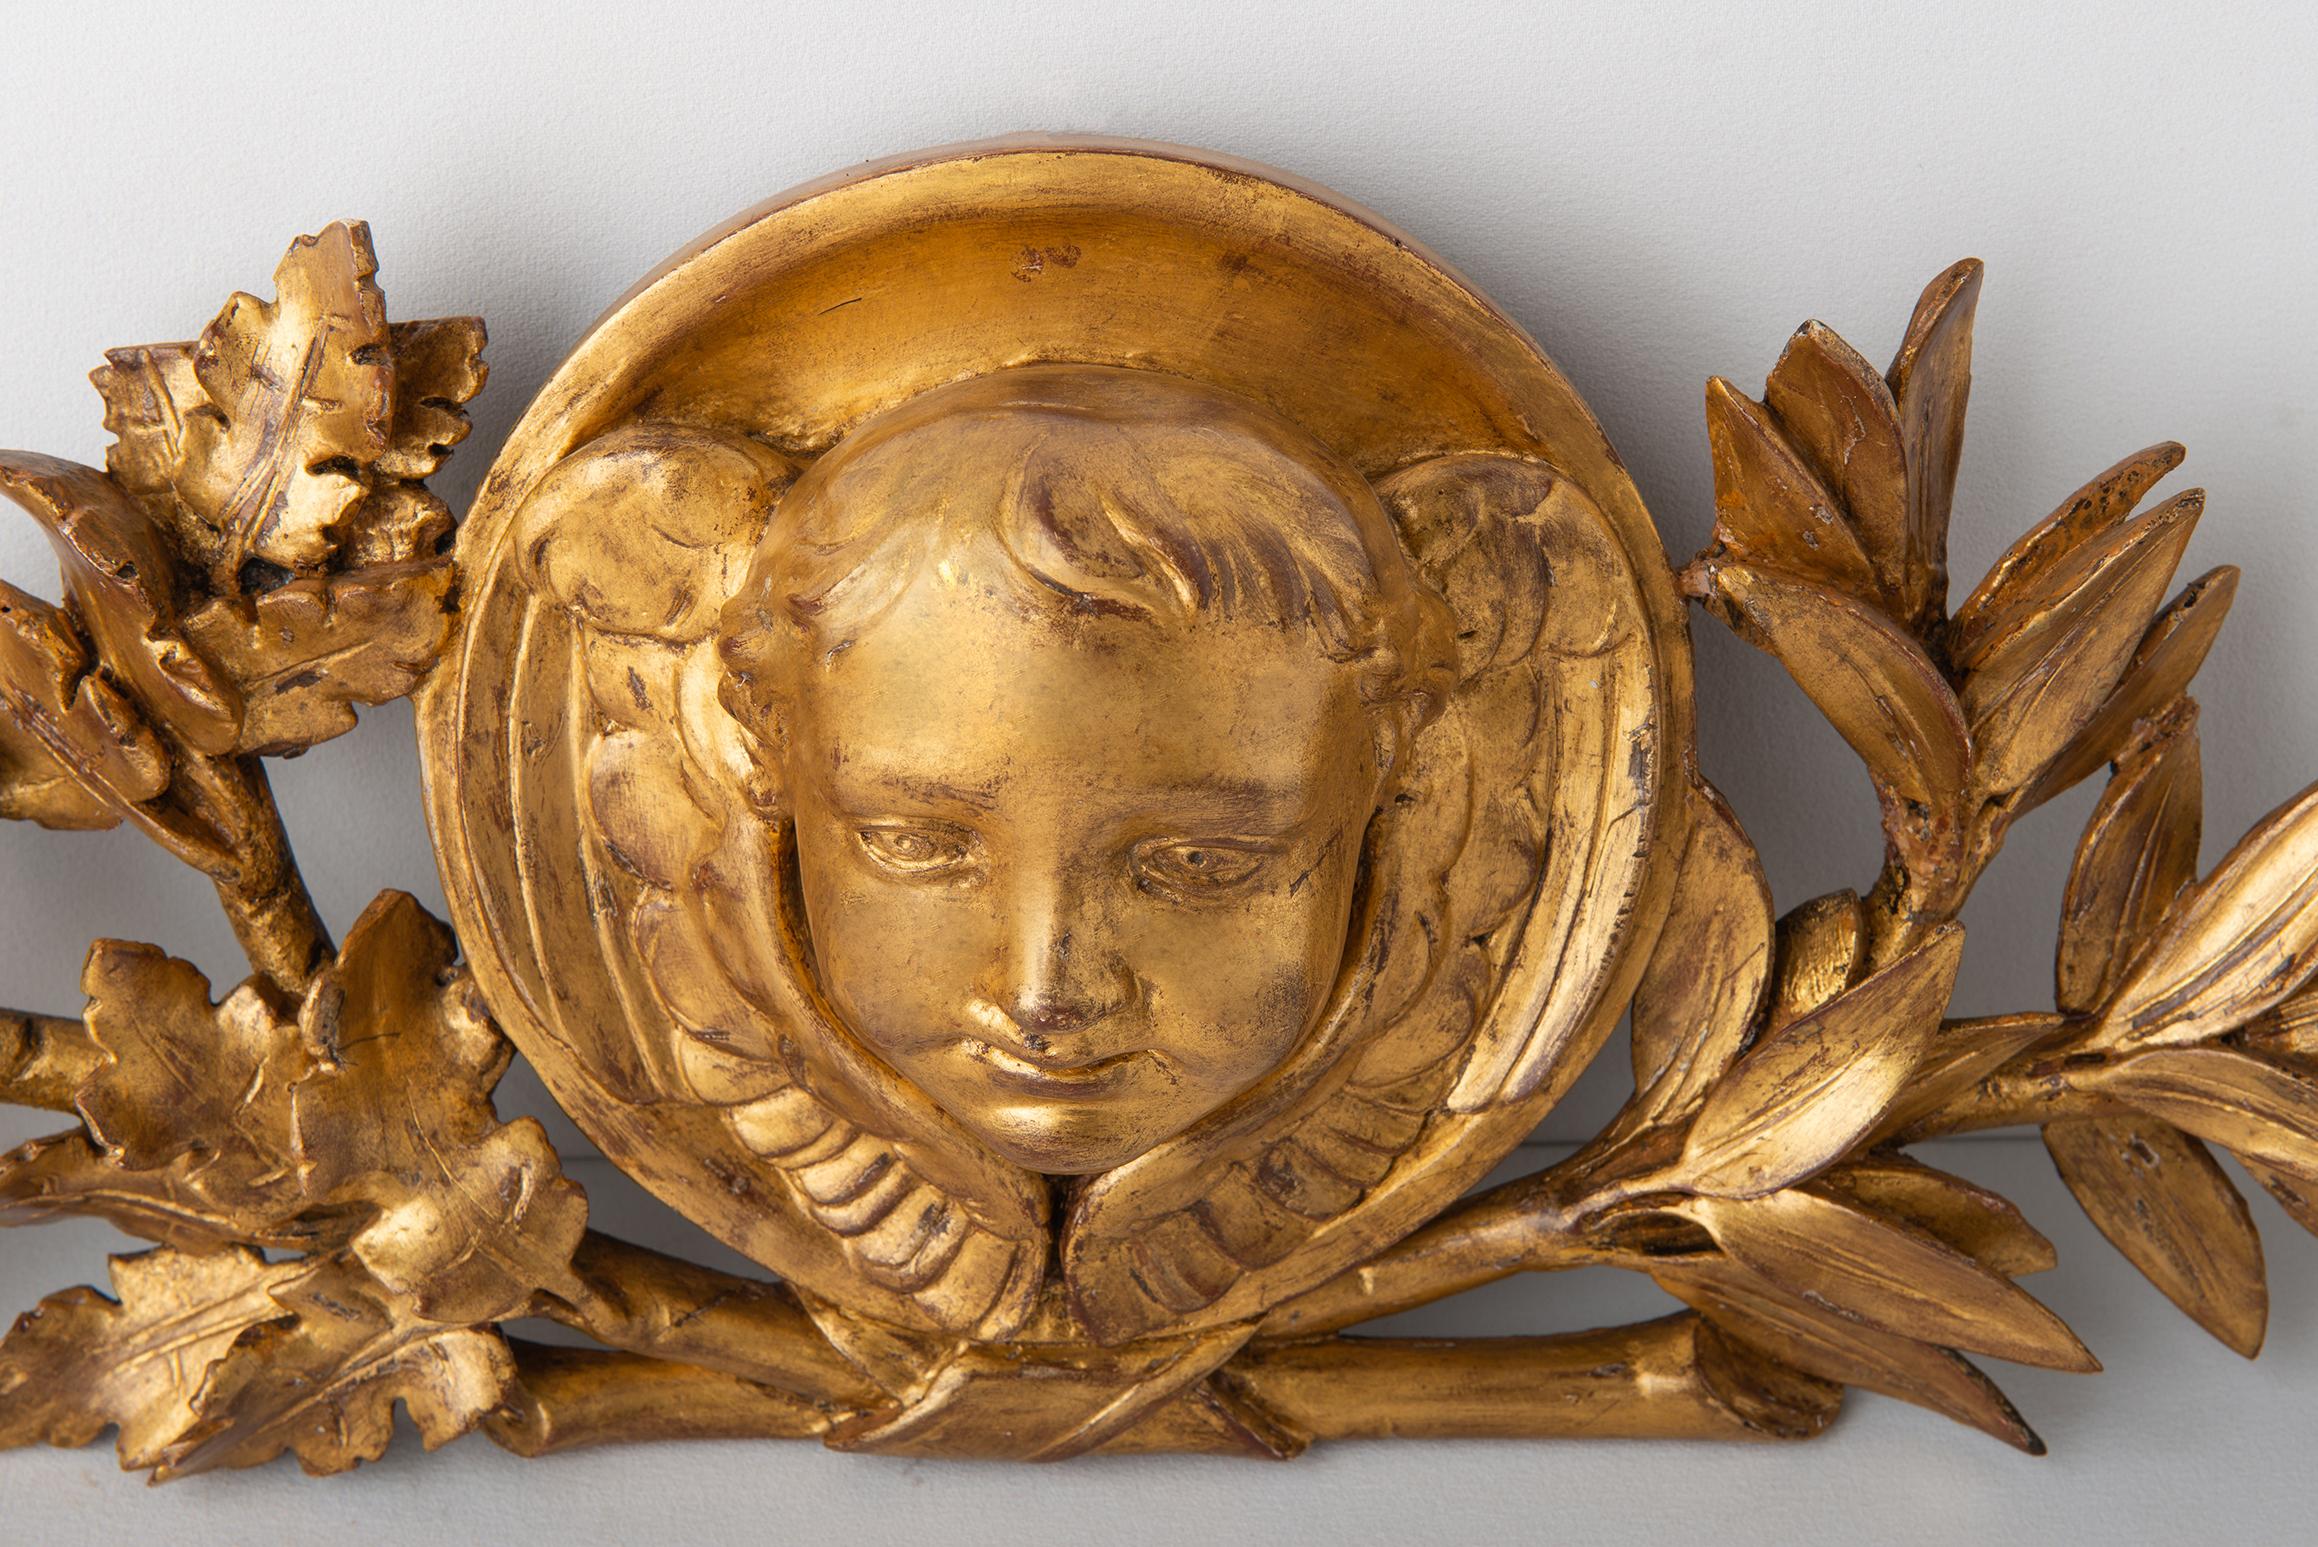 O/6460 - Rich gilded wood coping with angel head between an olive branch and an oak branch, to symbolize:
olive: peace, faith, strenght, triumph, victory, honor -
oak: strenght, longevity, hardness; considered the sacred tree.
Beautiful for headbord